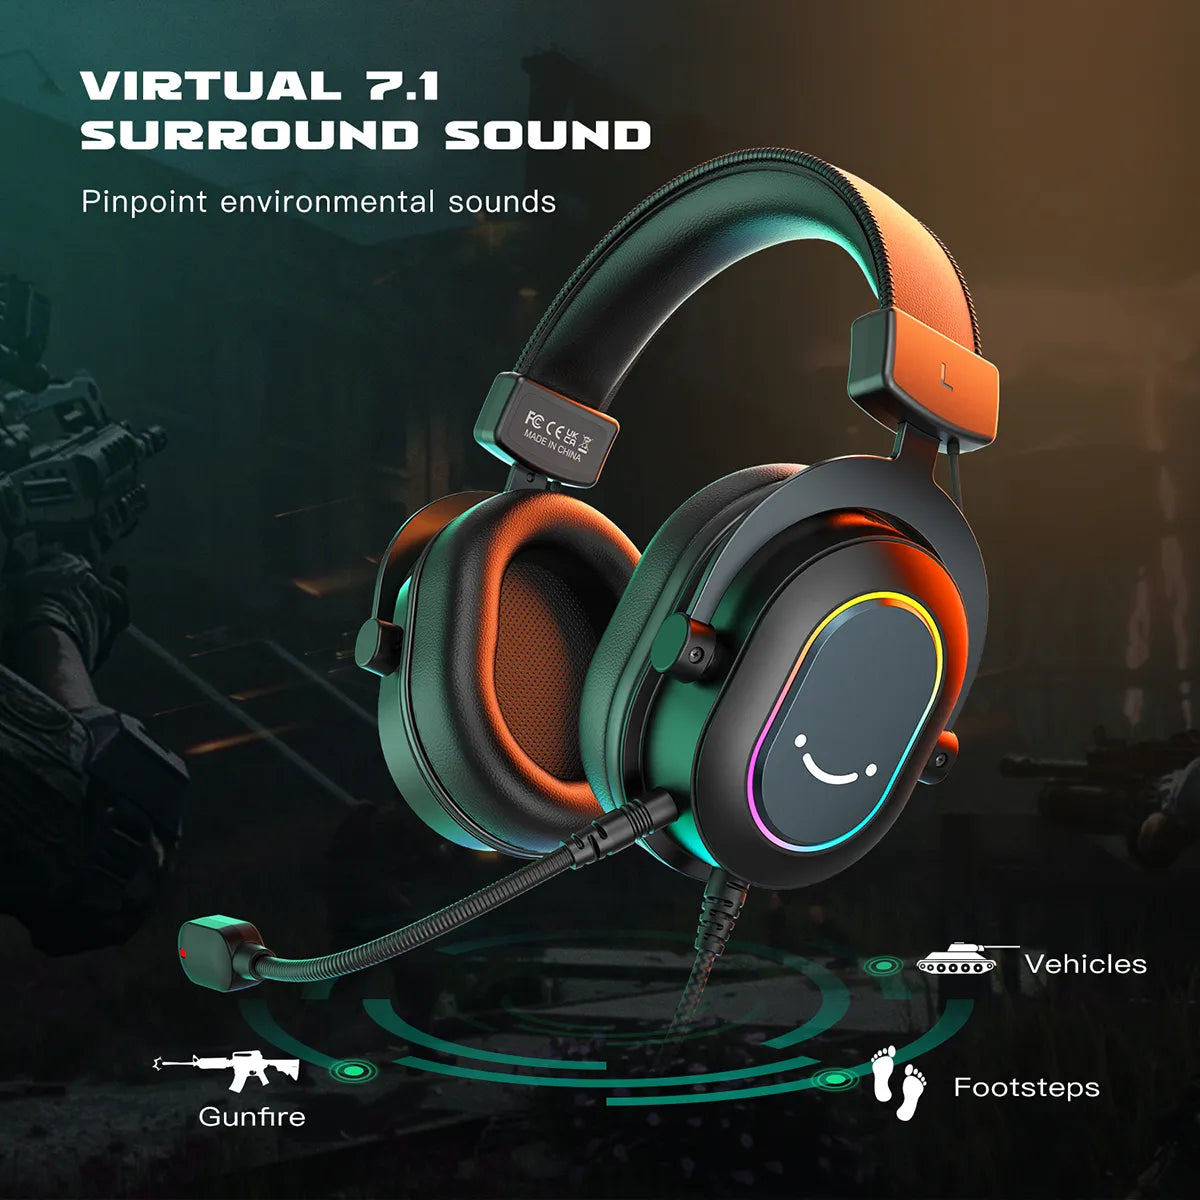 Surround Sound, Mic, and 3 EQ Modes for PC, PS4, PS5 - Over-Ear Headphones for Games, Movies, and Music